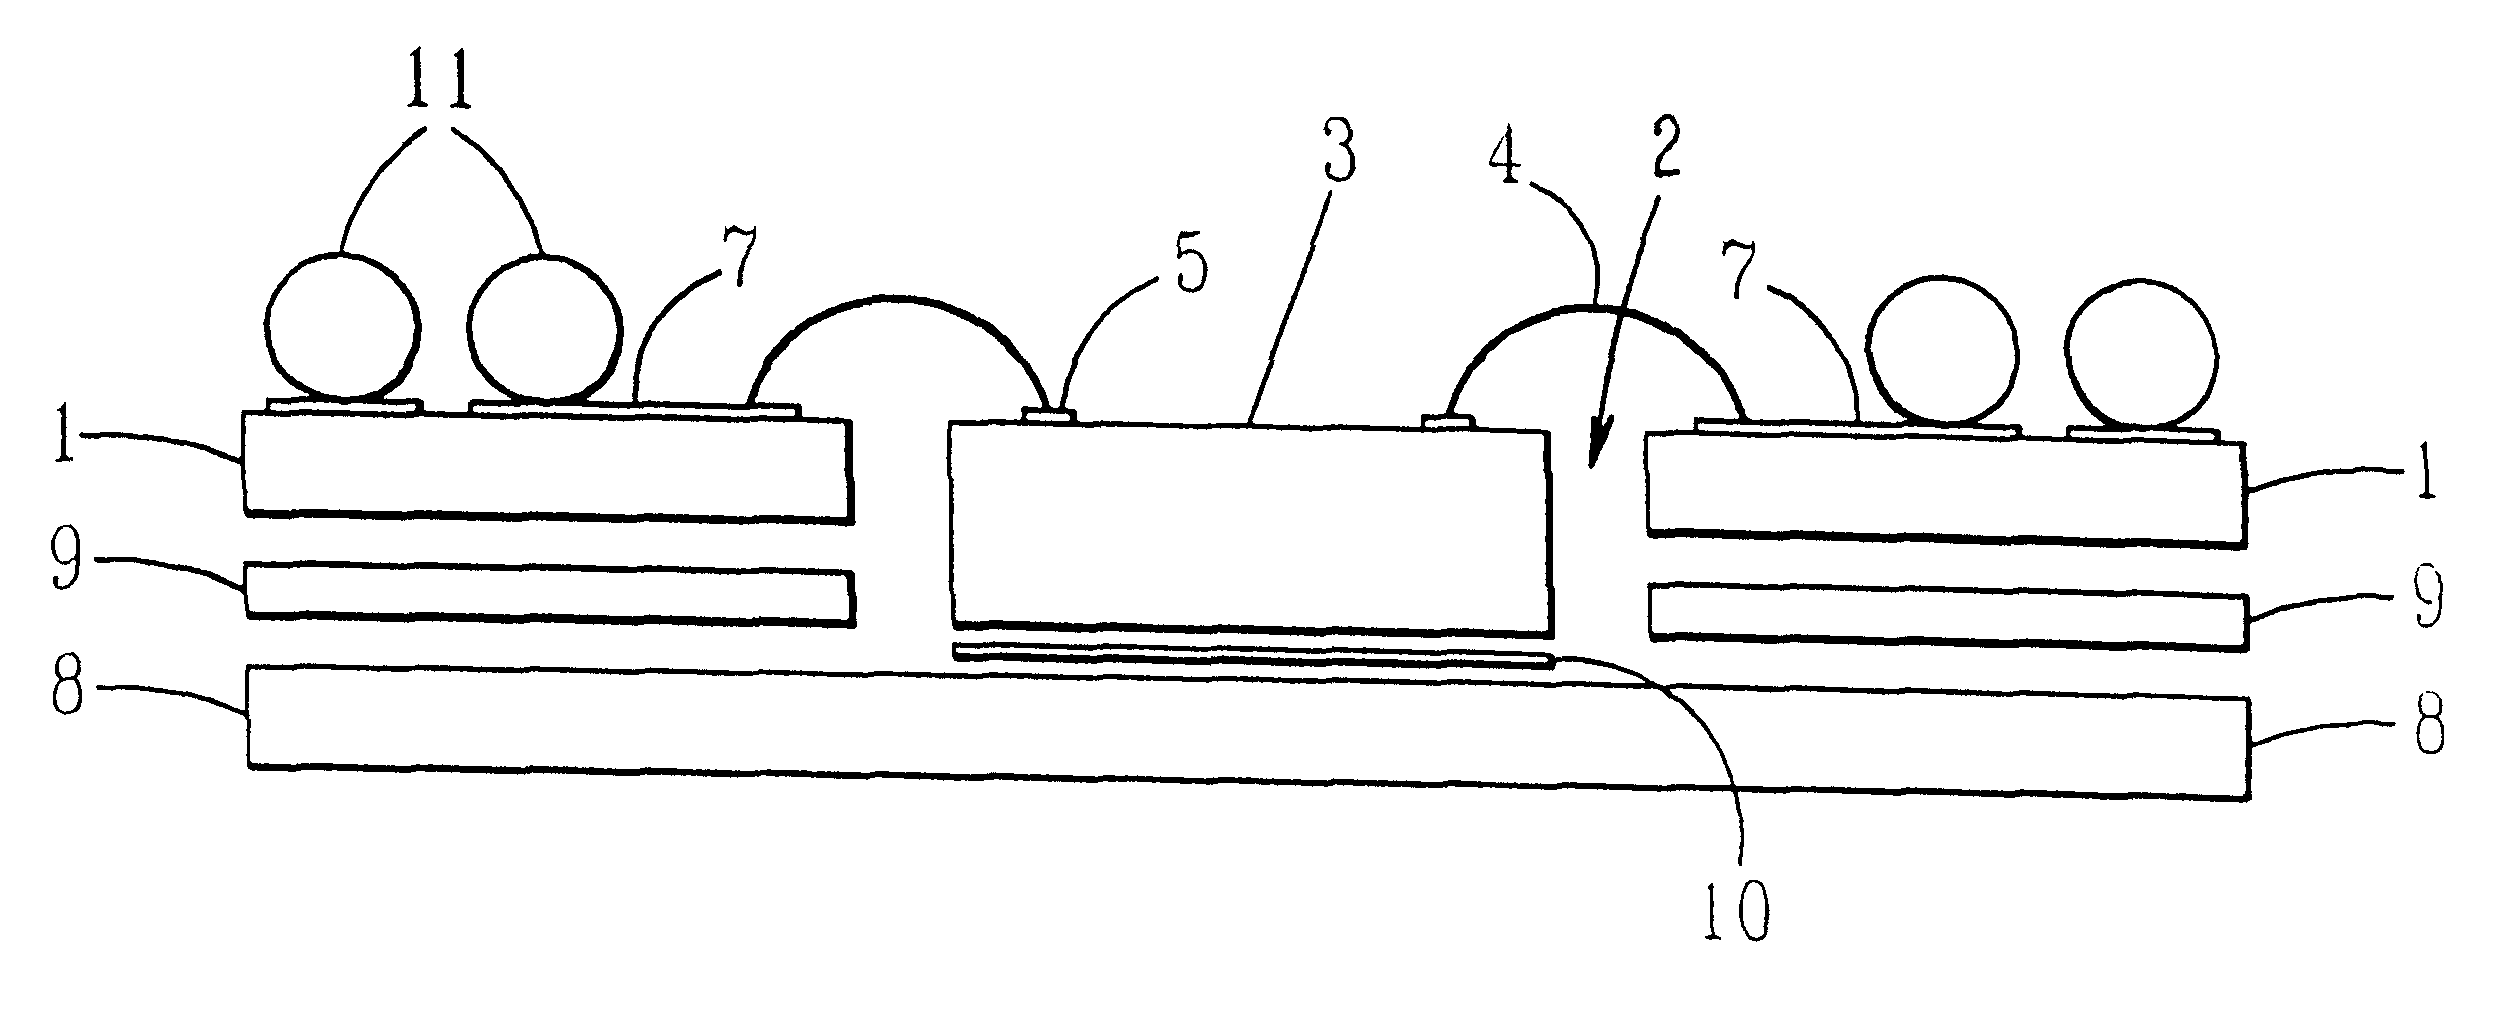 Integrated circuit chip carrier assembly comprising a stiffener attached to a dielectric substrate